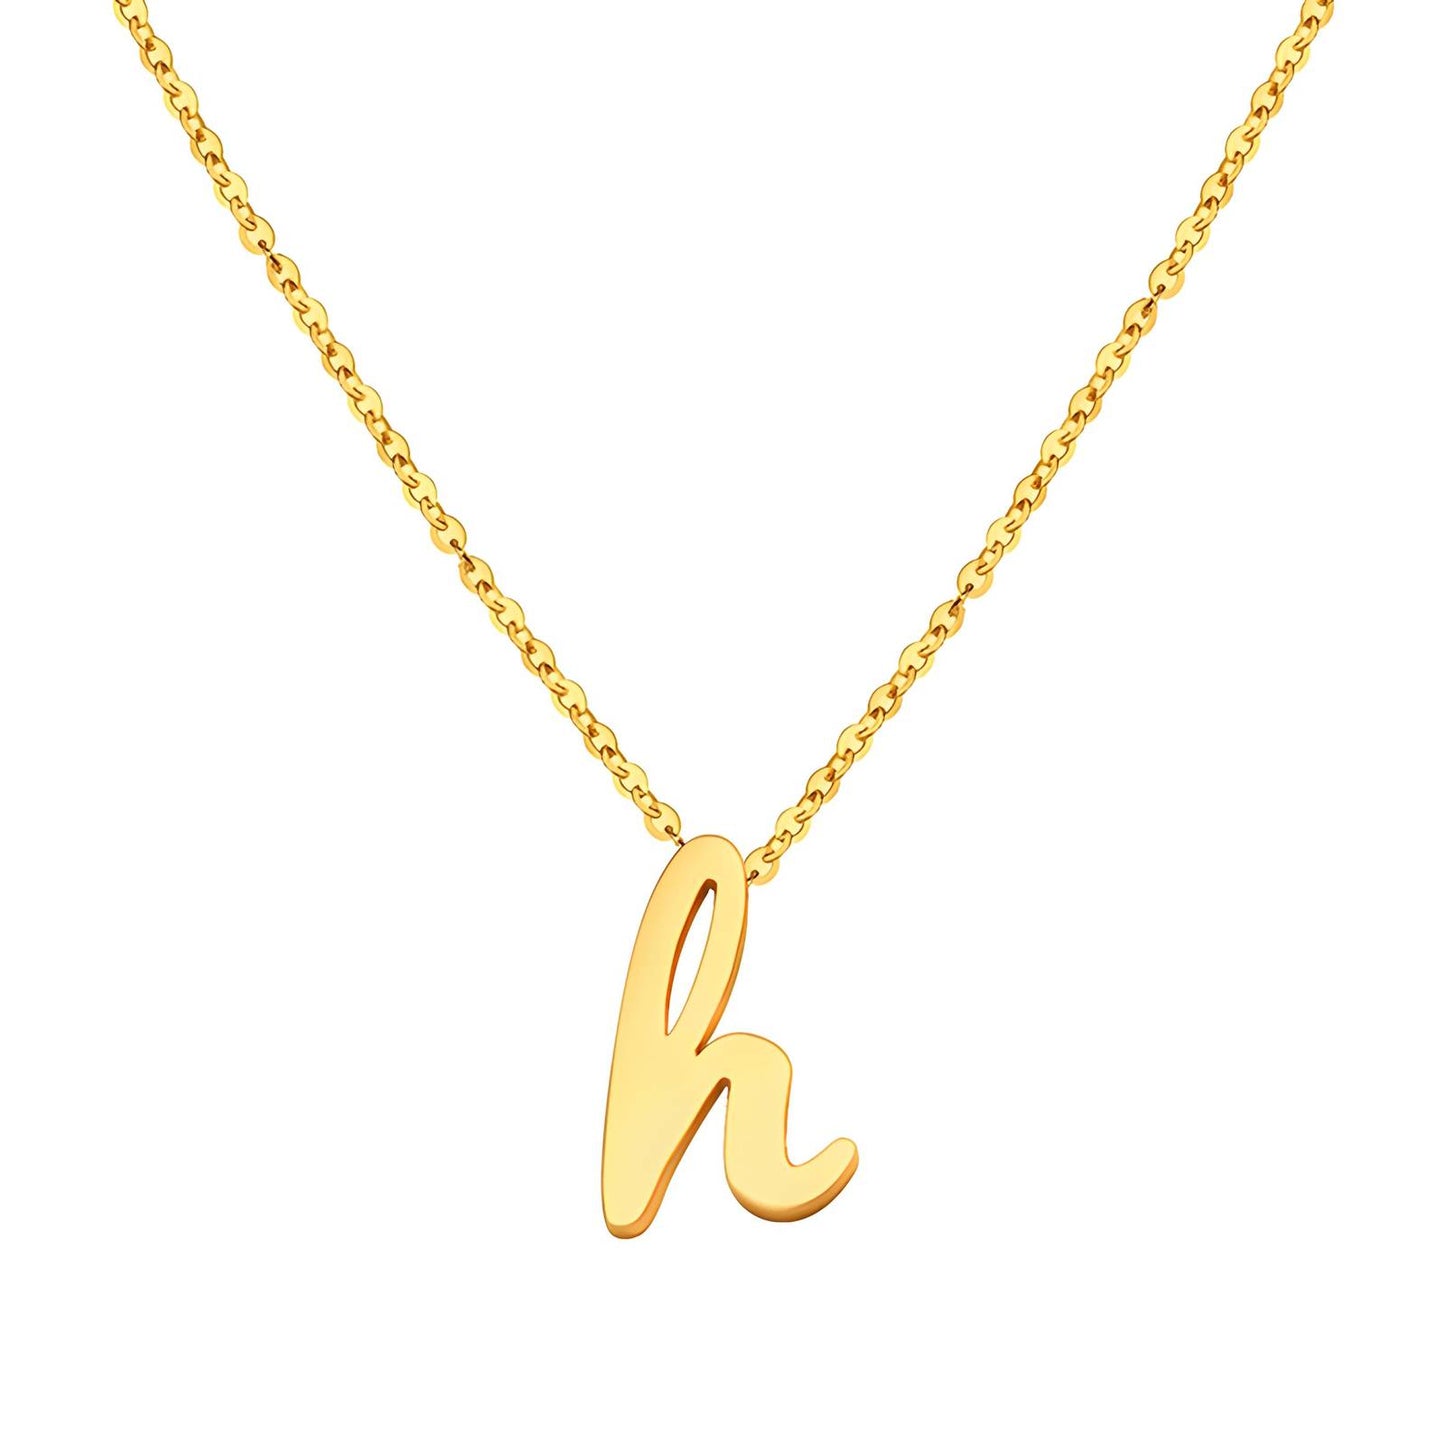 18K gold plated Stainless steel  Letter H necklace